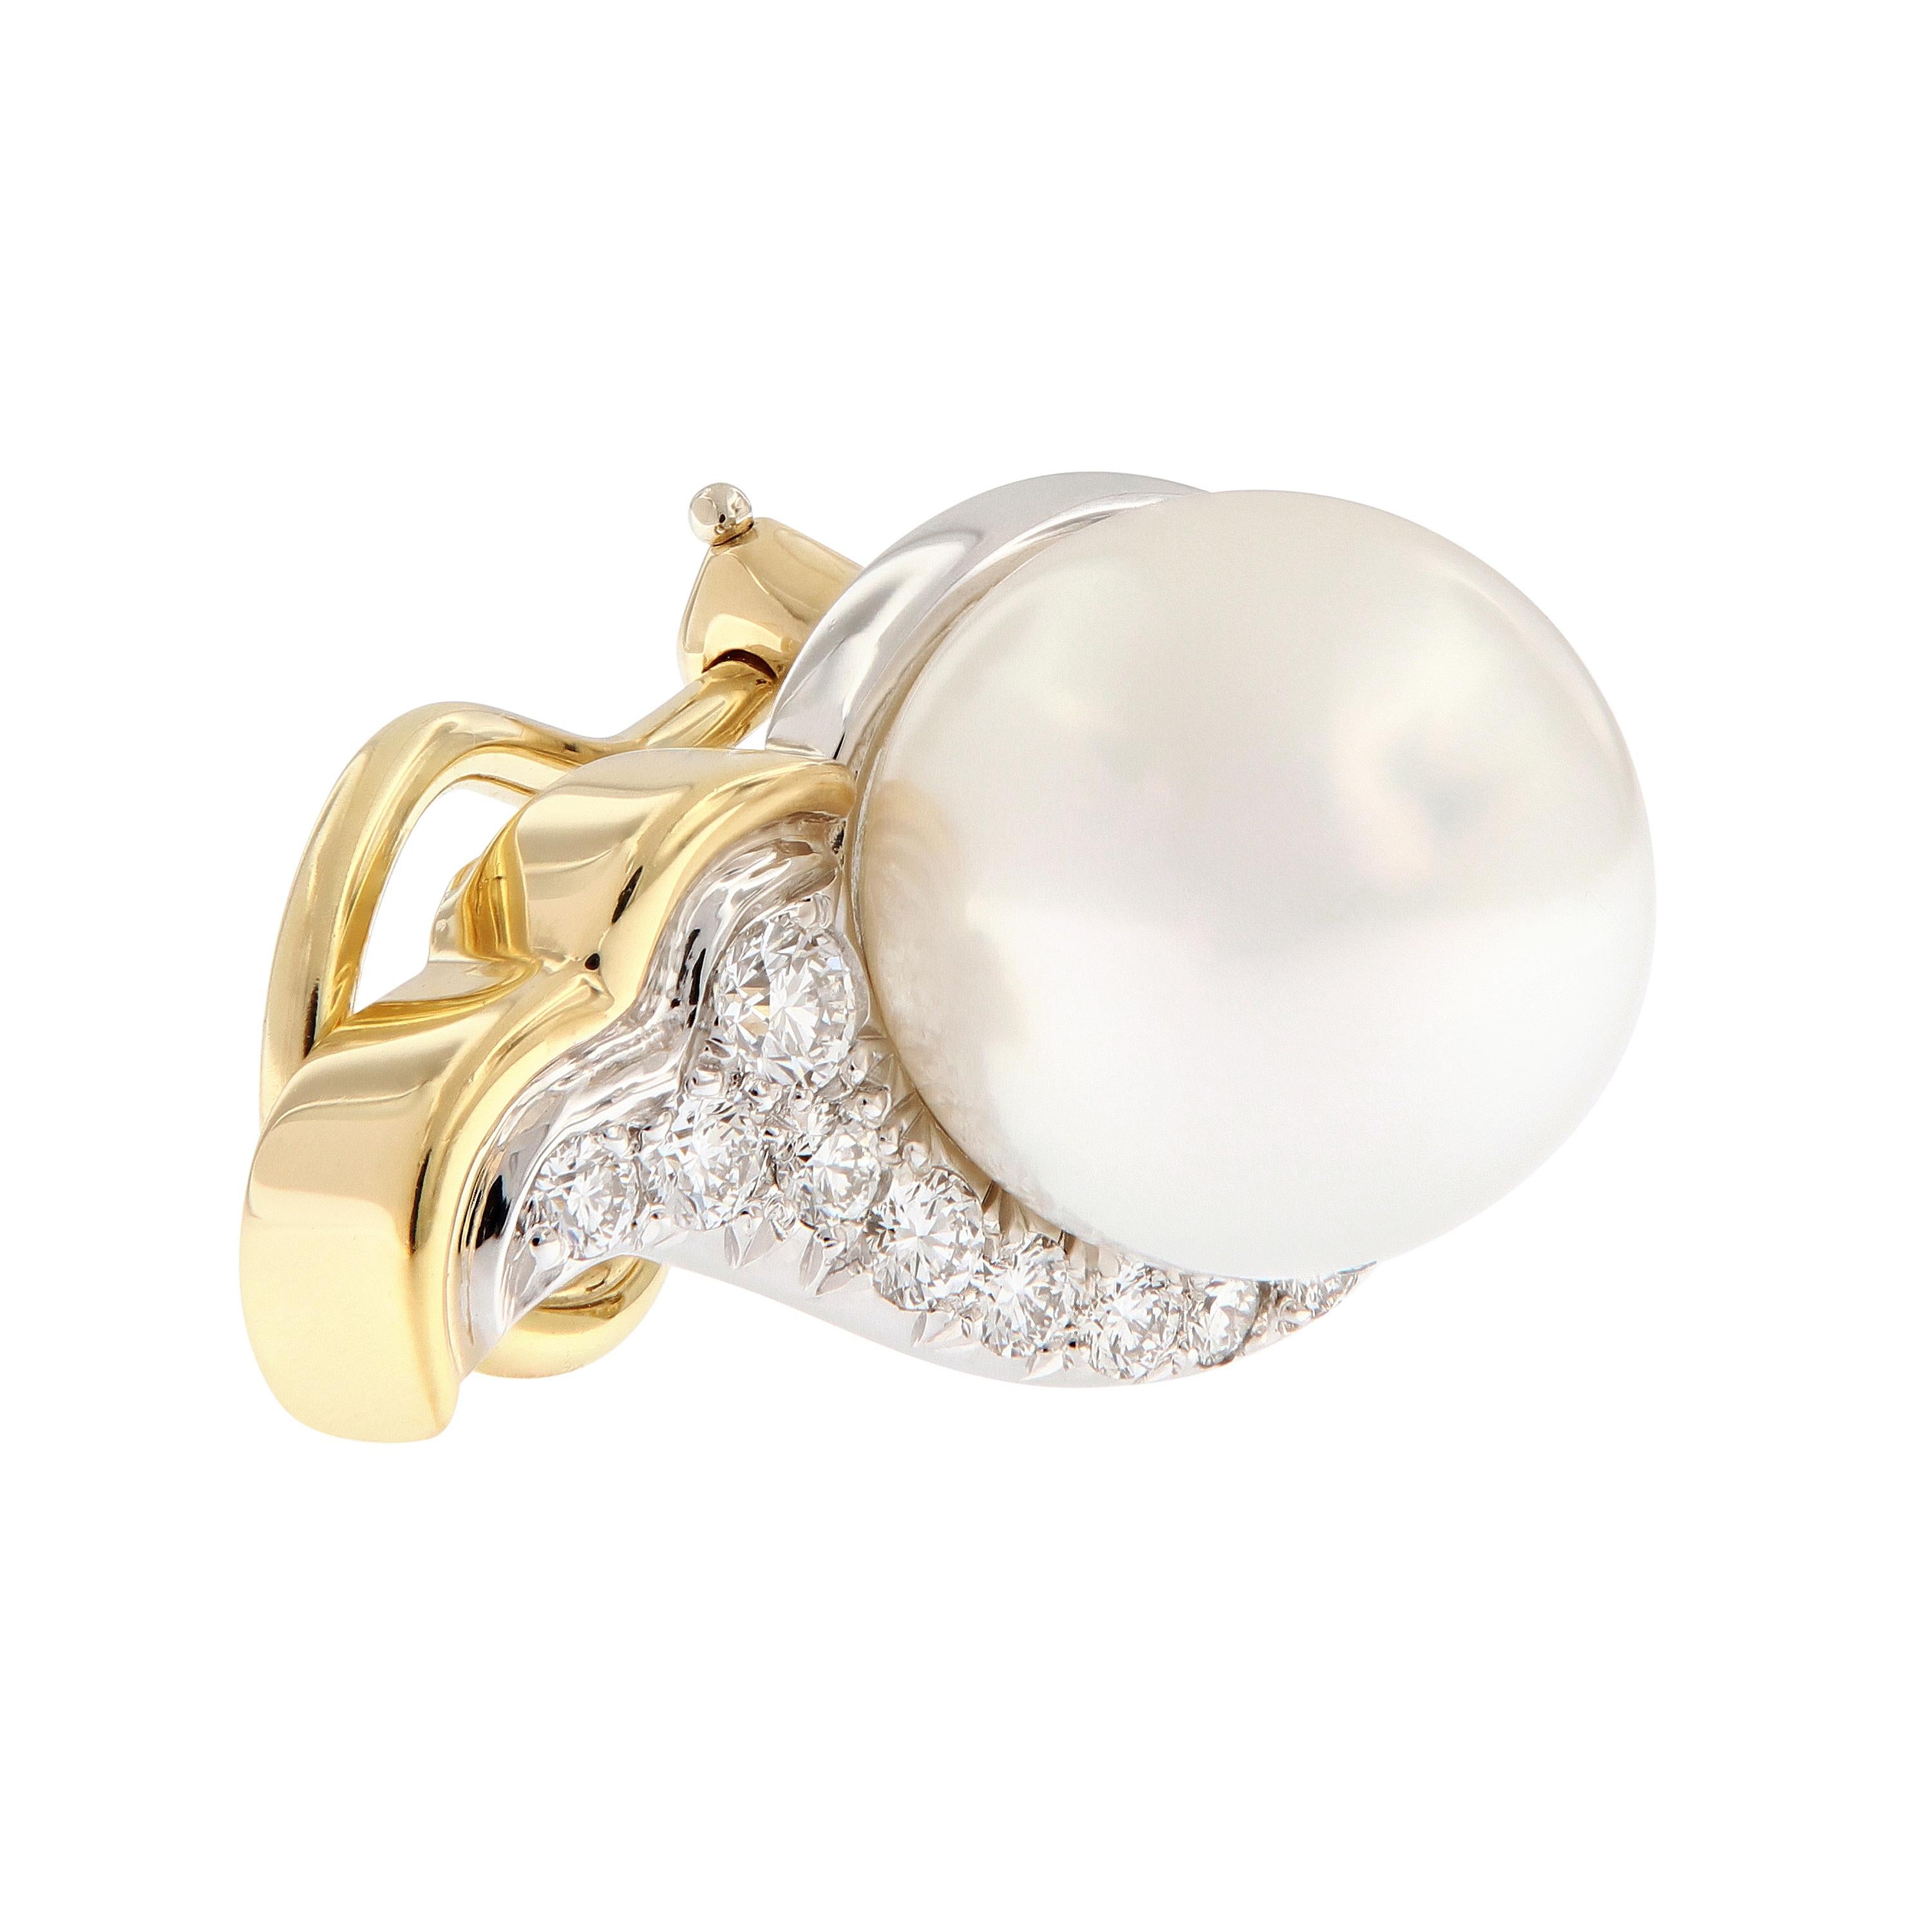 Stunning South Sea cultured pearls are wrapped in a scalloped row of Diamonds and 18k yellow gold and platinum. Designed by Angela Cummings for Assael of New York.  Marked Angela Cummings.

South Sea Pearls 10.7mm x 10.7mm. 
Diamonds 0.48 cttw.